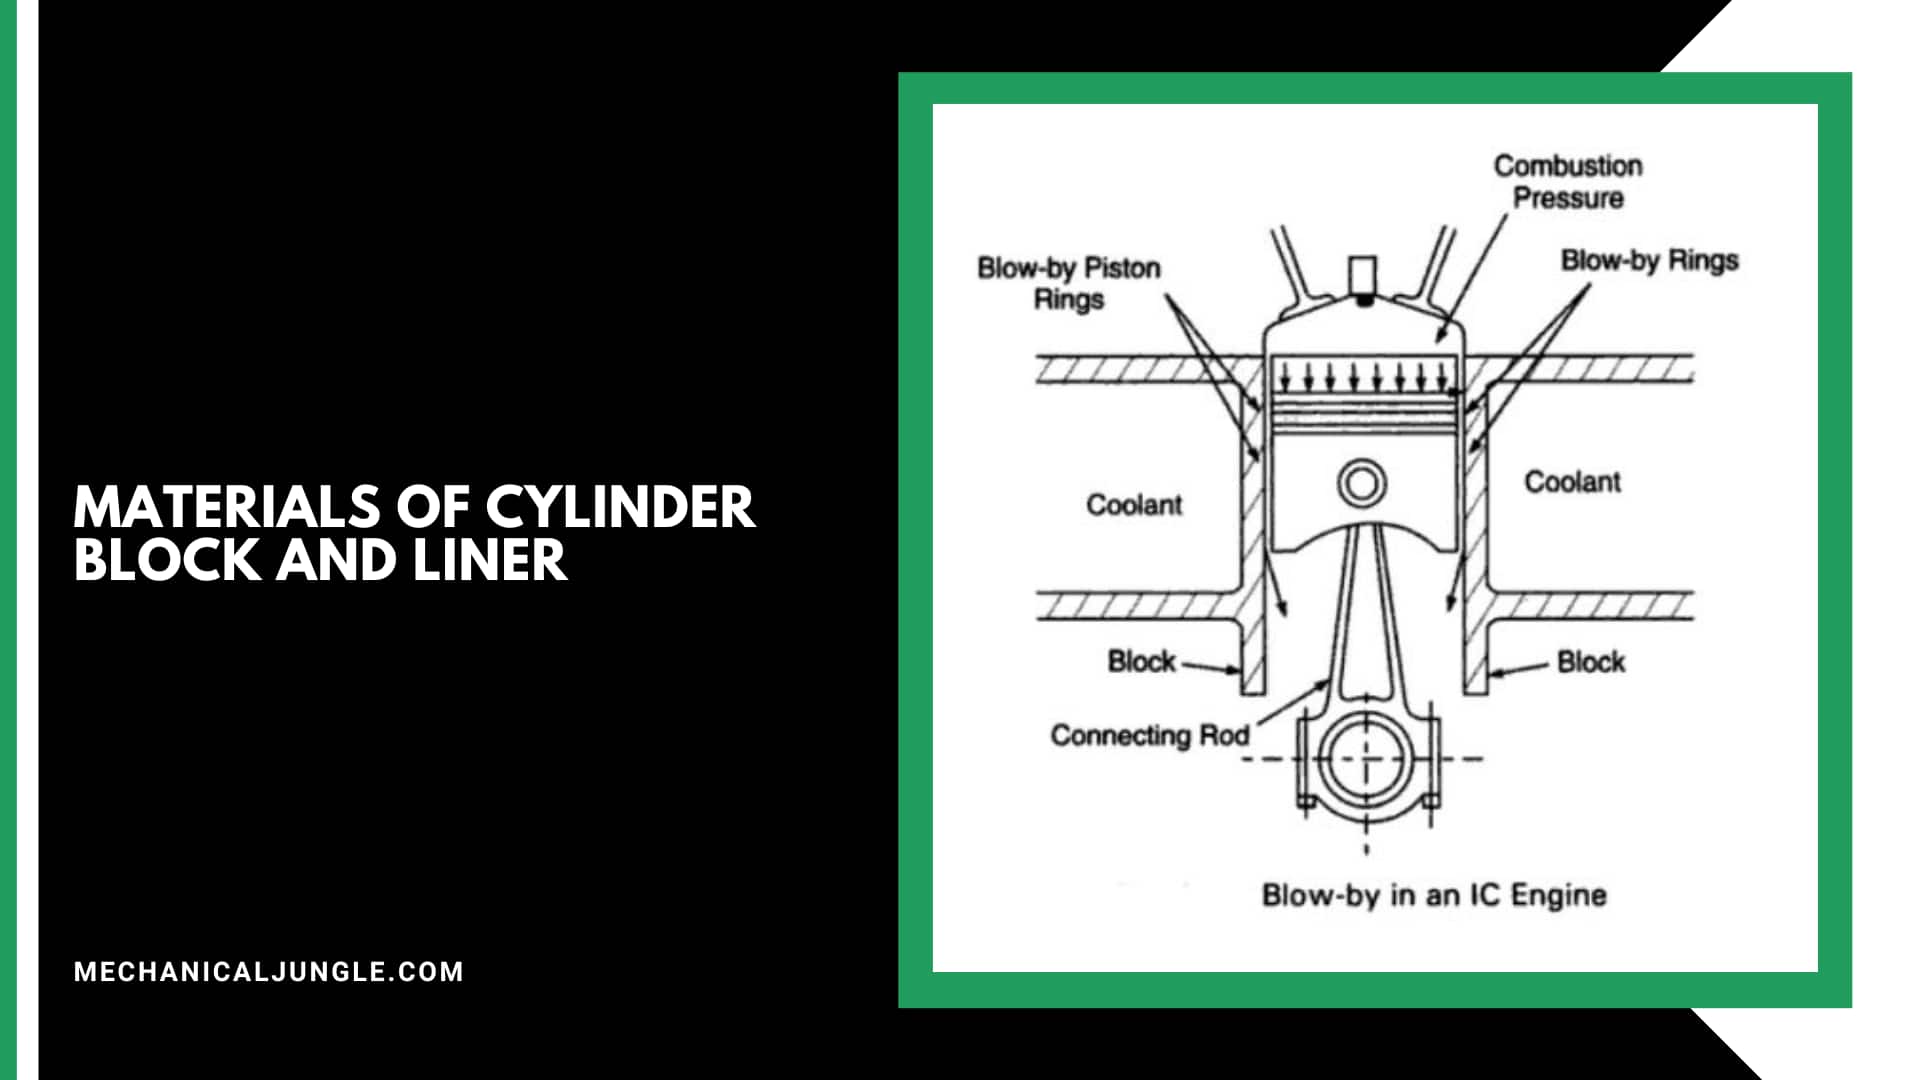 Materials of Cylinder Block and Liner